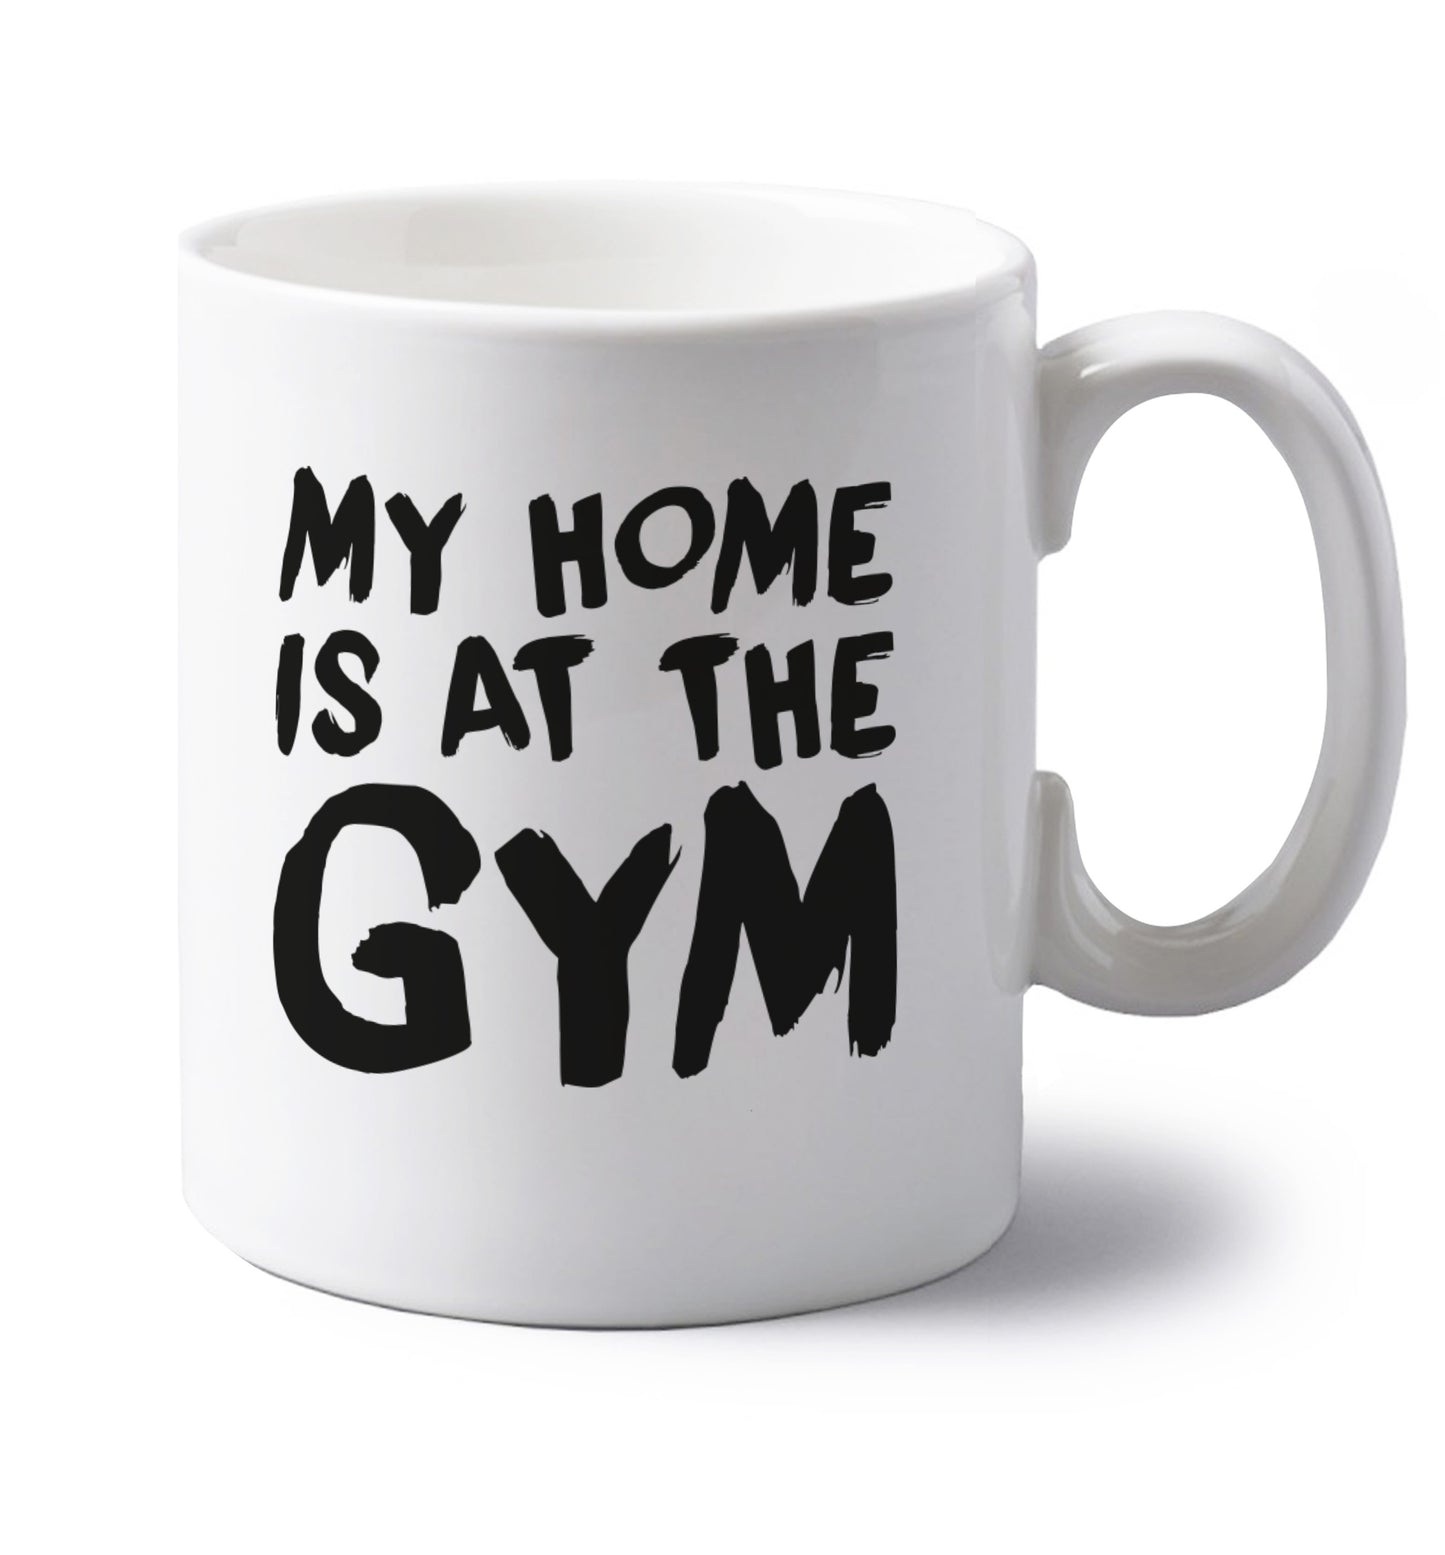 My home is at the gym left handed white ceramic mug 